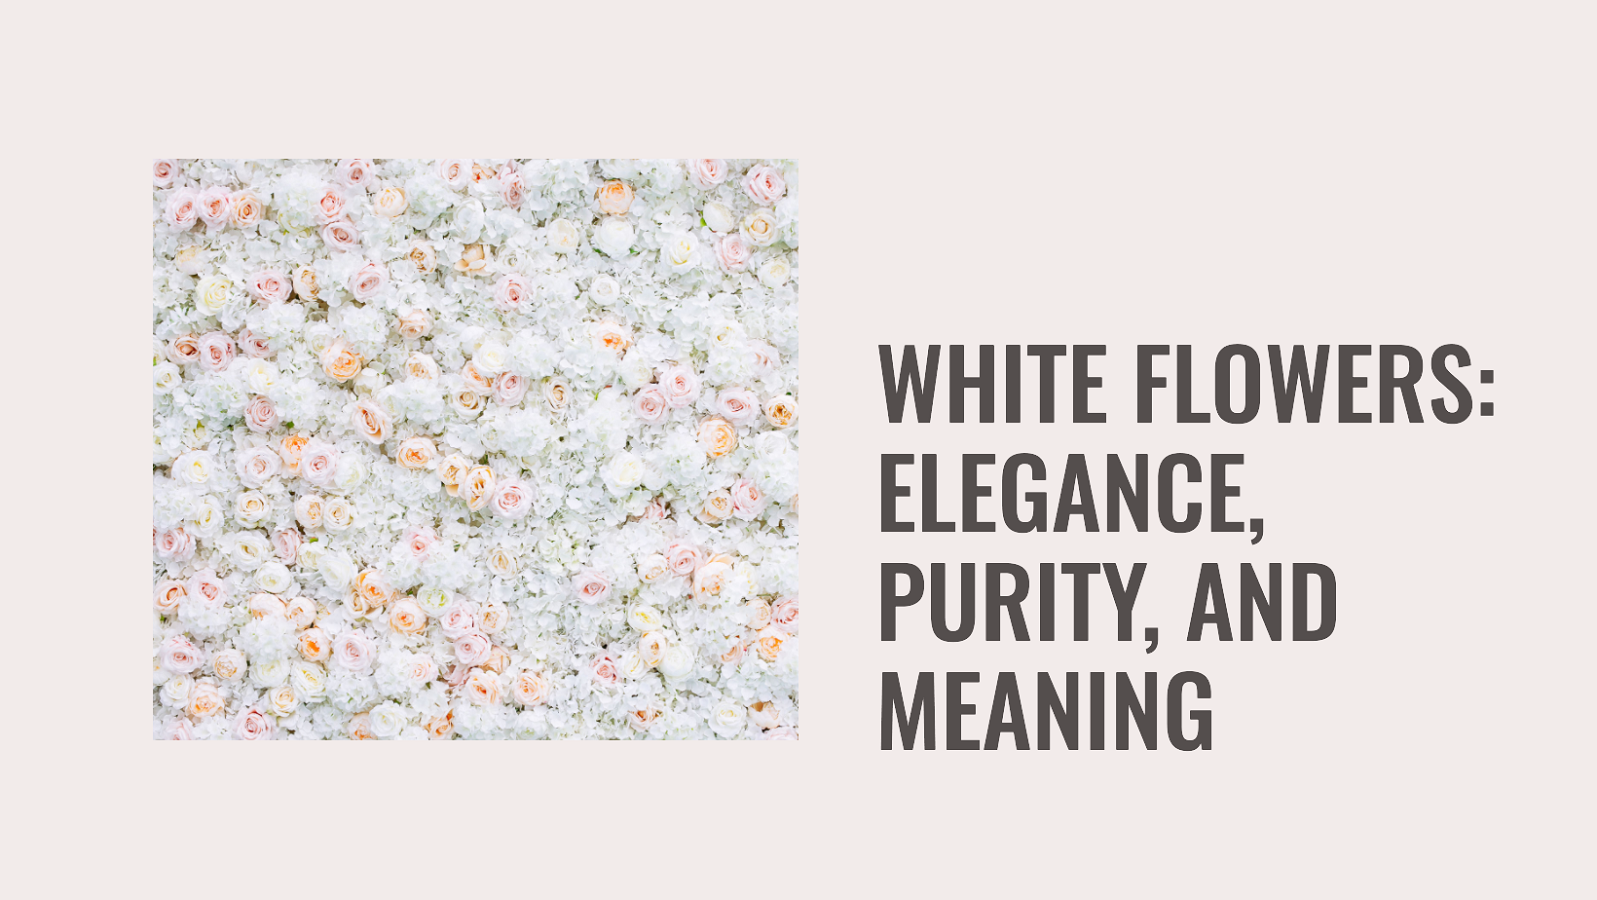 https://lilysflorist.com/images/blog/5/White_Flowers_Elegance,_Purity,_and_the_Many_Meanings_They_Convey.png